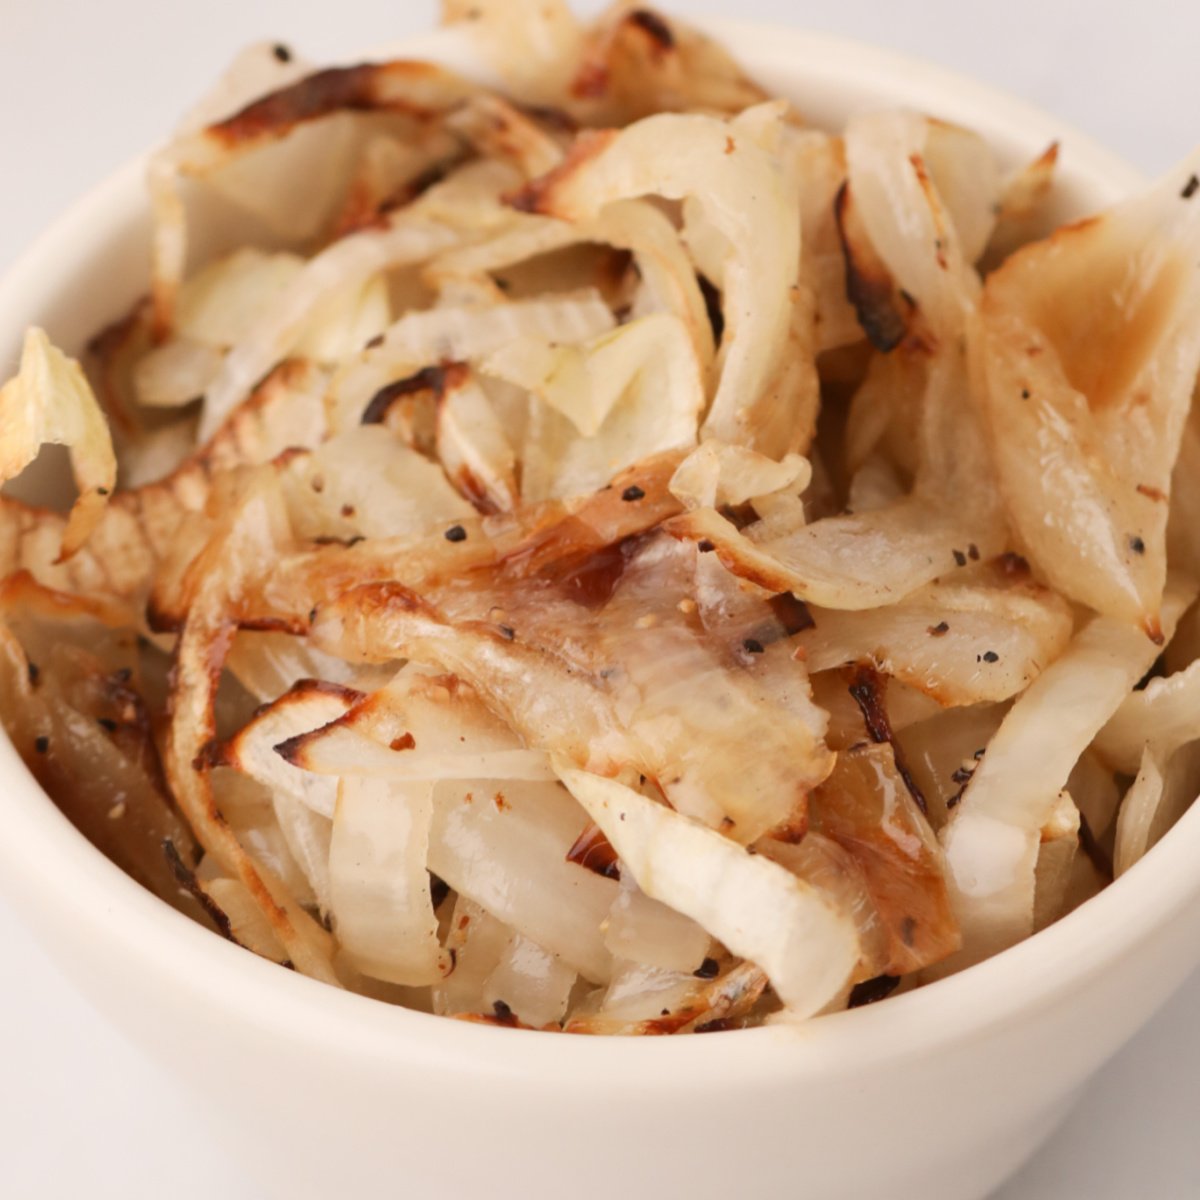 Bowl of sauteed fried onions that were made in the air fryer.